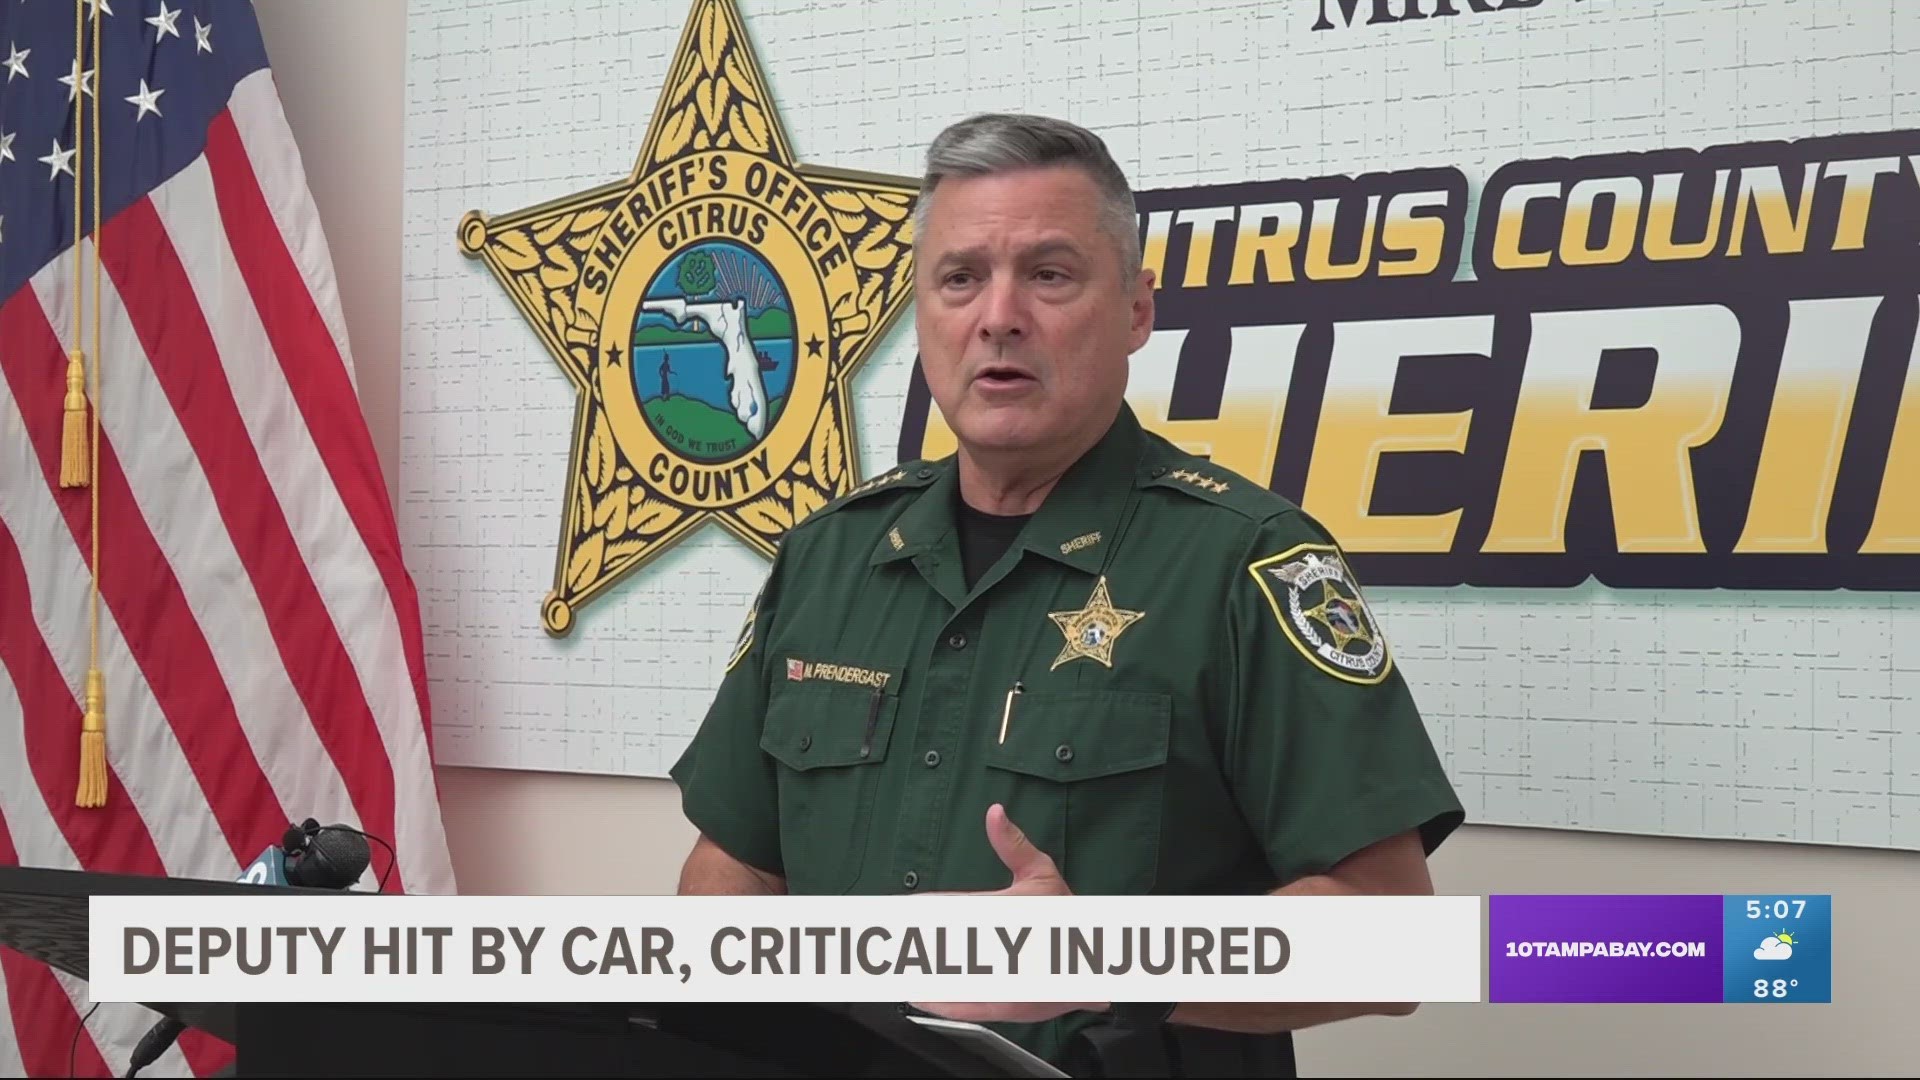 Deputy Andy Lahera was hit and injured while directing traffic at the intersection of Saunders Way and South Lecanto Highway.